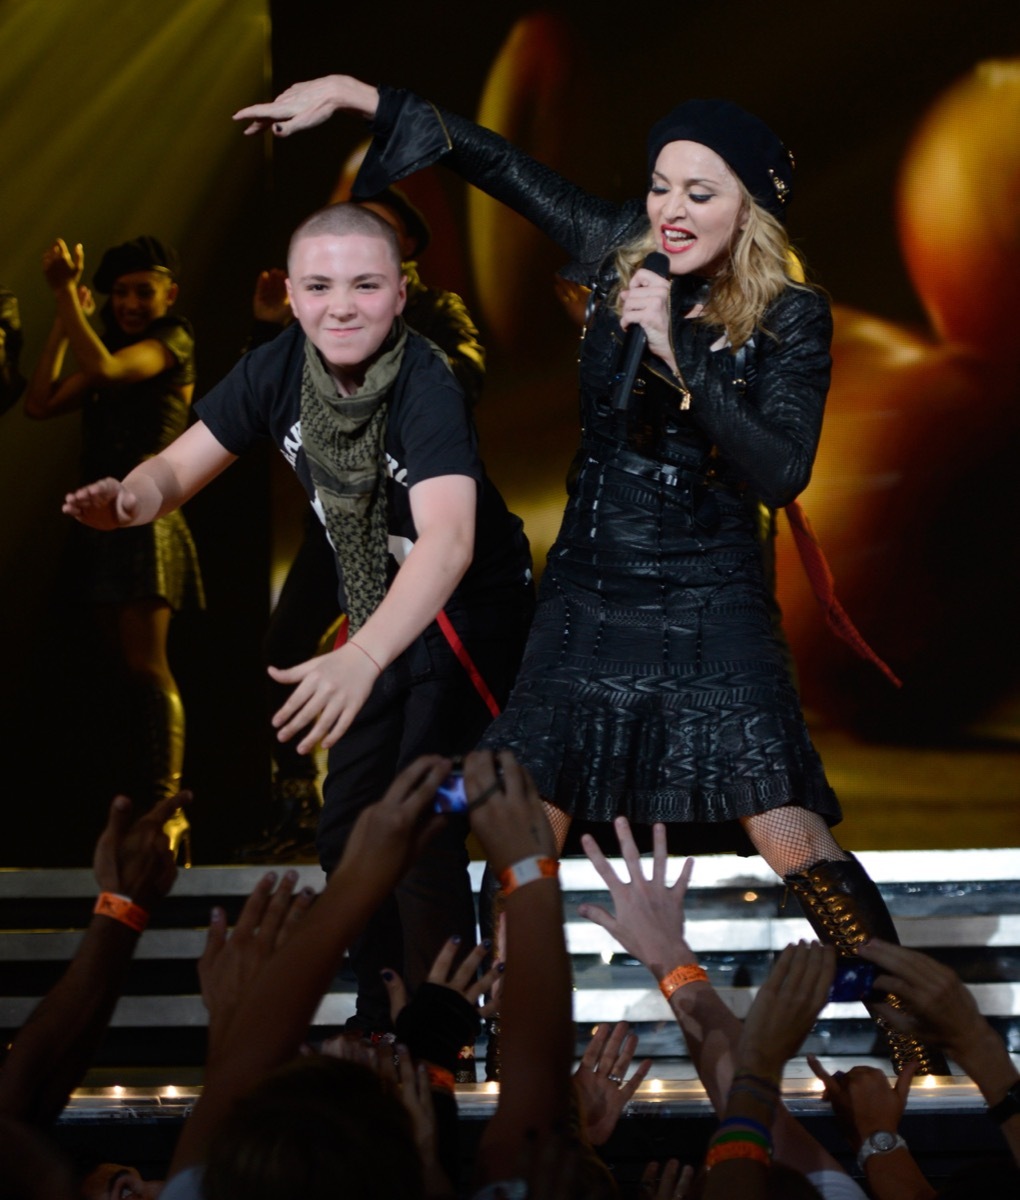 Madonna and Rocco Ritchie performing MDNA tour